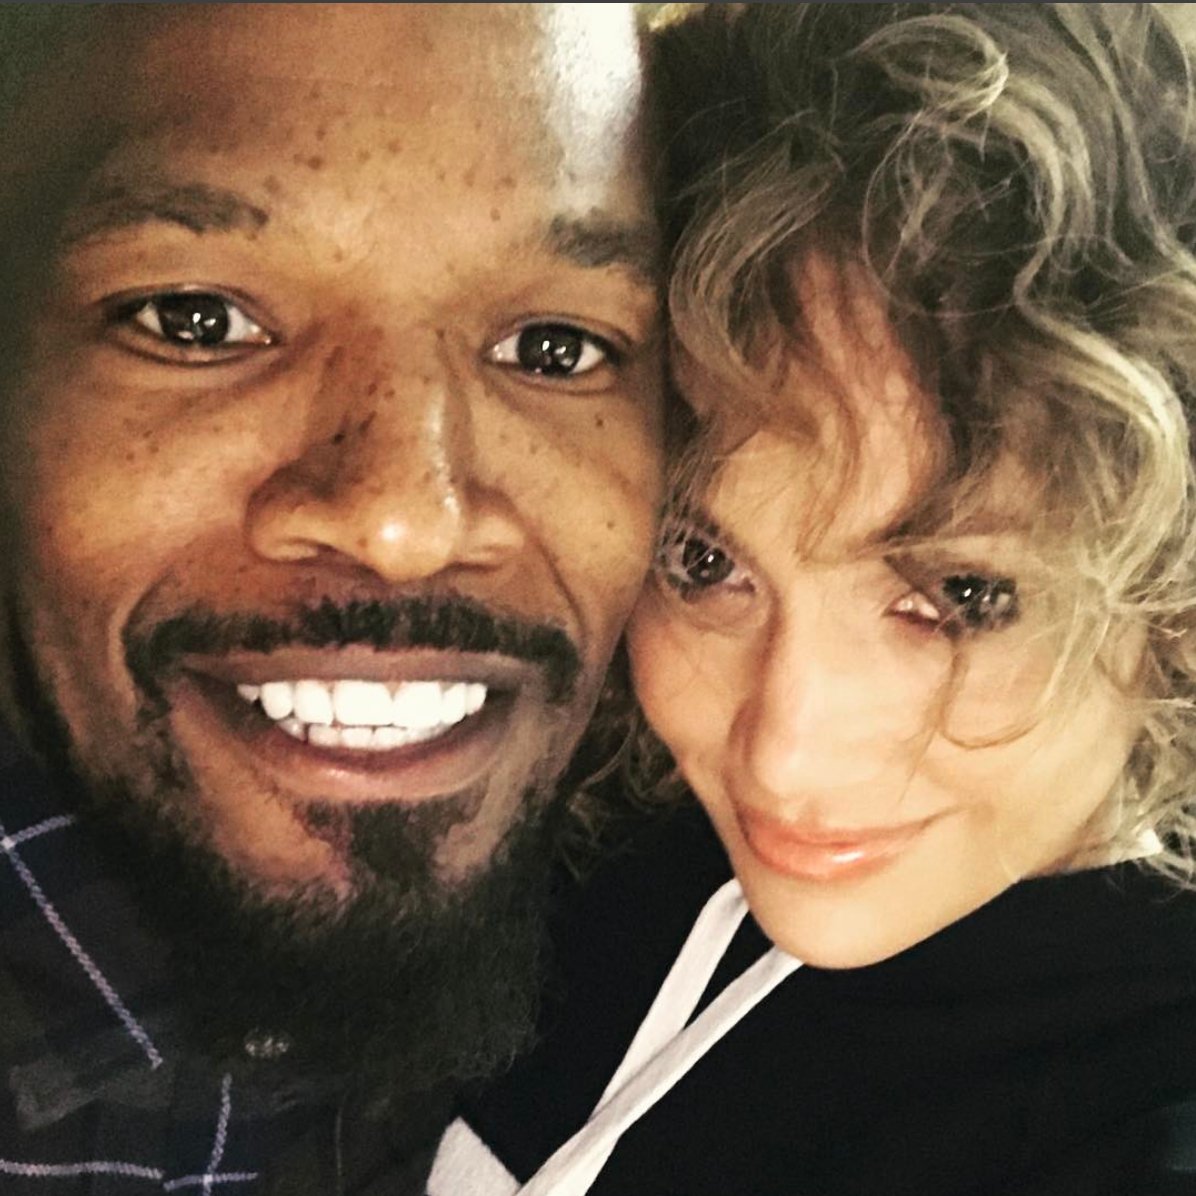 Always lots of laughs when you run into this guy!! @iamjamiefoxx #reunion #inlivingcolor #flygirl https://t.co/M8fKFKCGmz